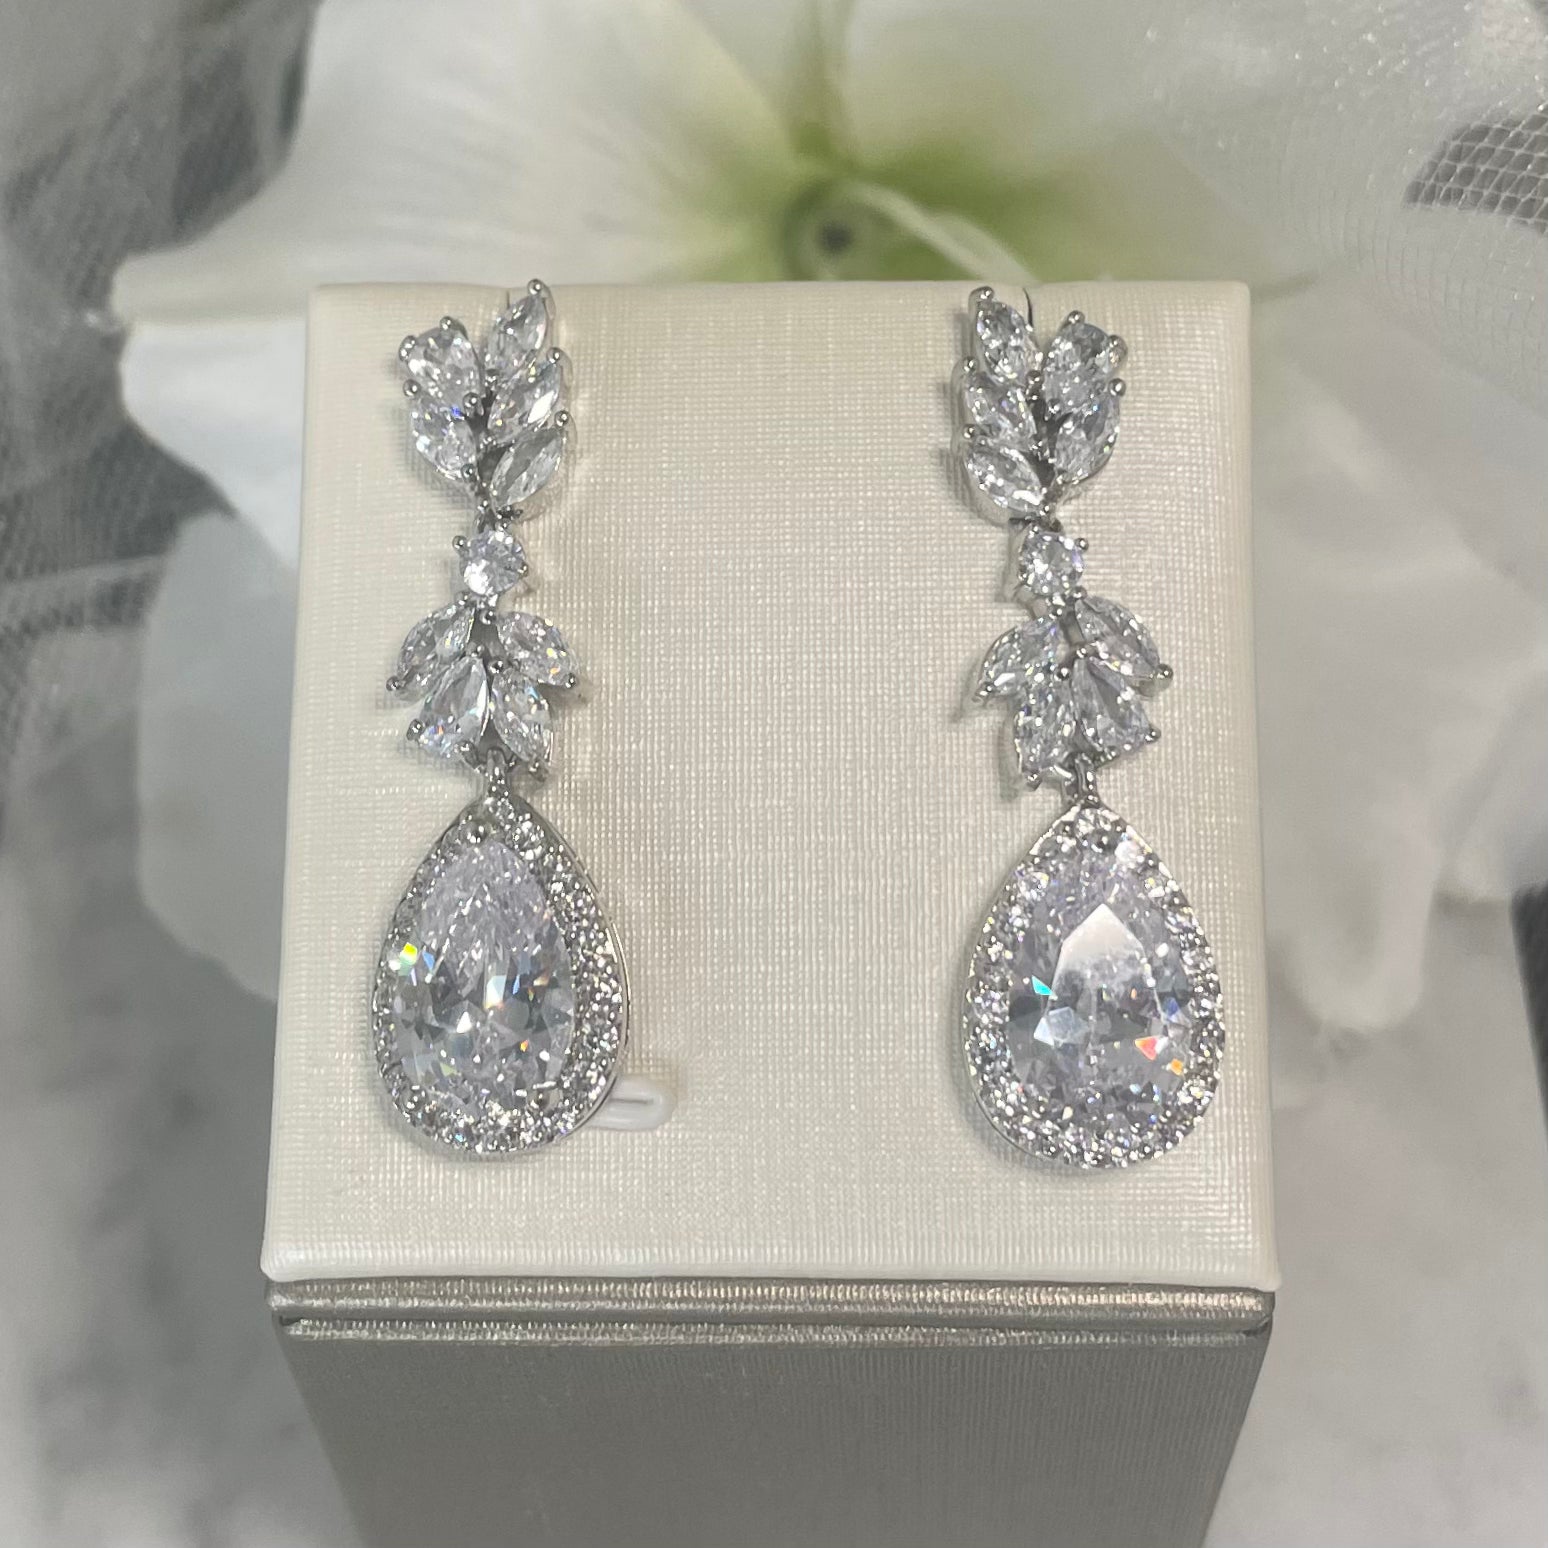 Bloom wedding earrings with leaf-shaped crystals and a central teardrop crystal surrounded by small rounds, crafted in elegant 18k gold/silver plated finish, perfect for bridal elegance.